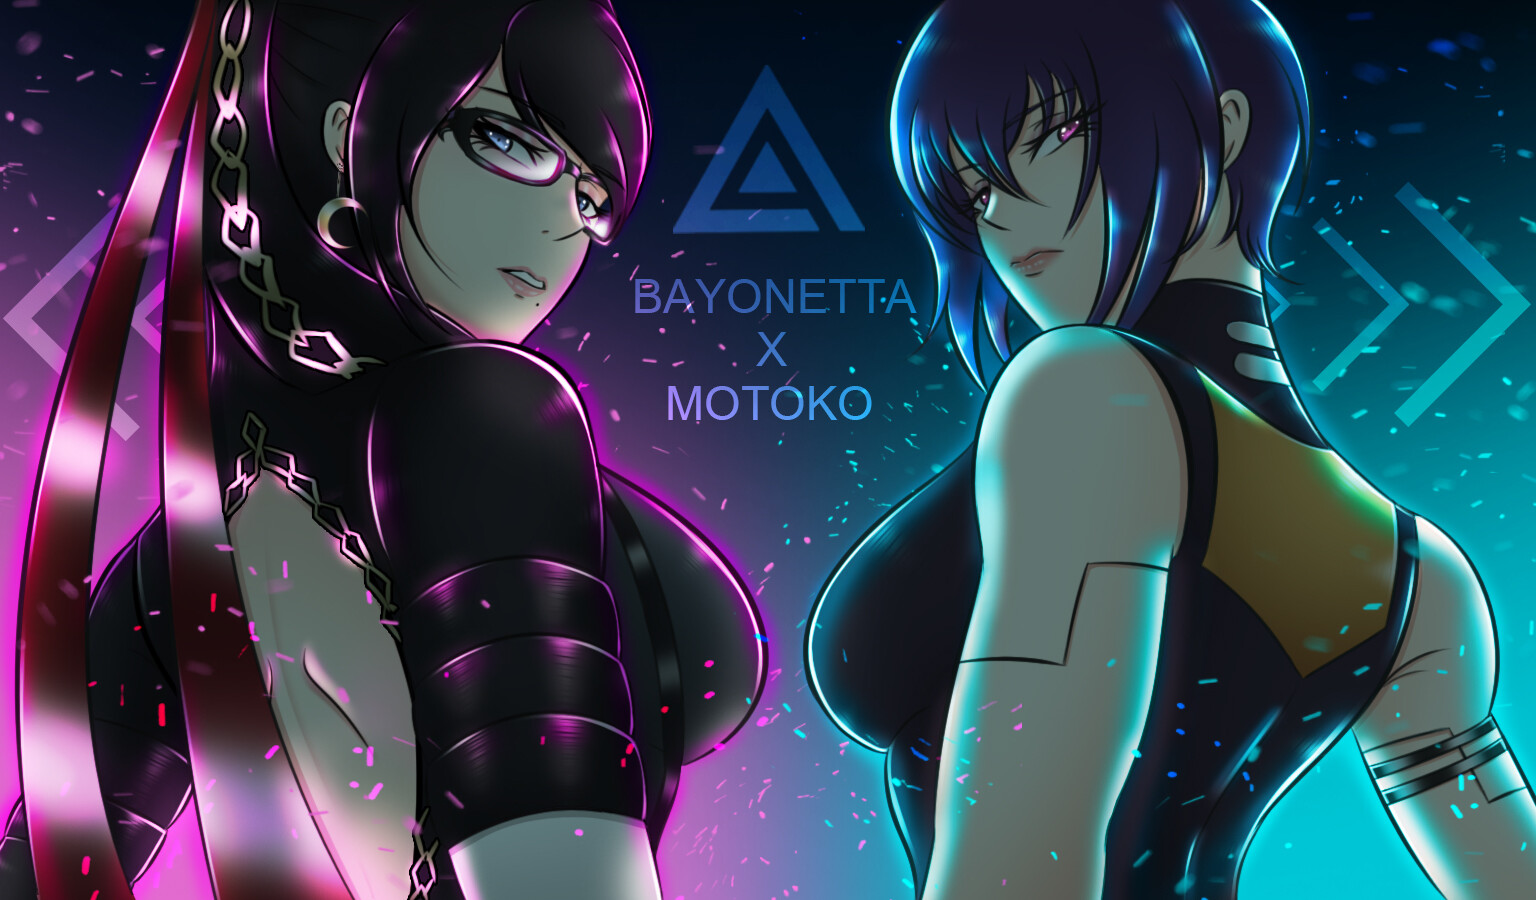 Bayonetta X Motoko from Ghost in the shell SAC_2045 by Voocartoon pic